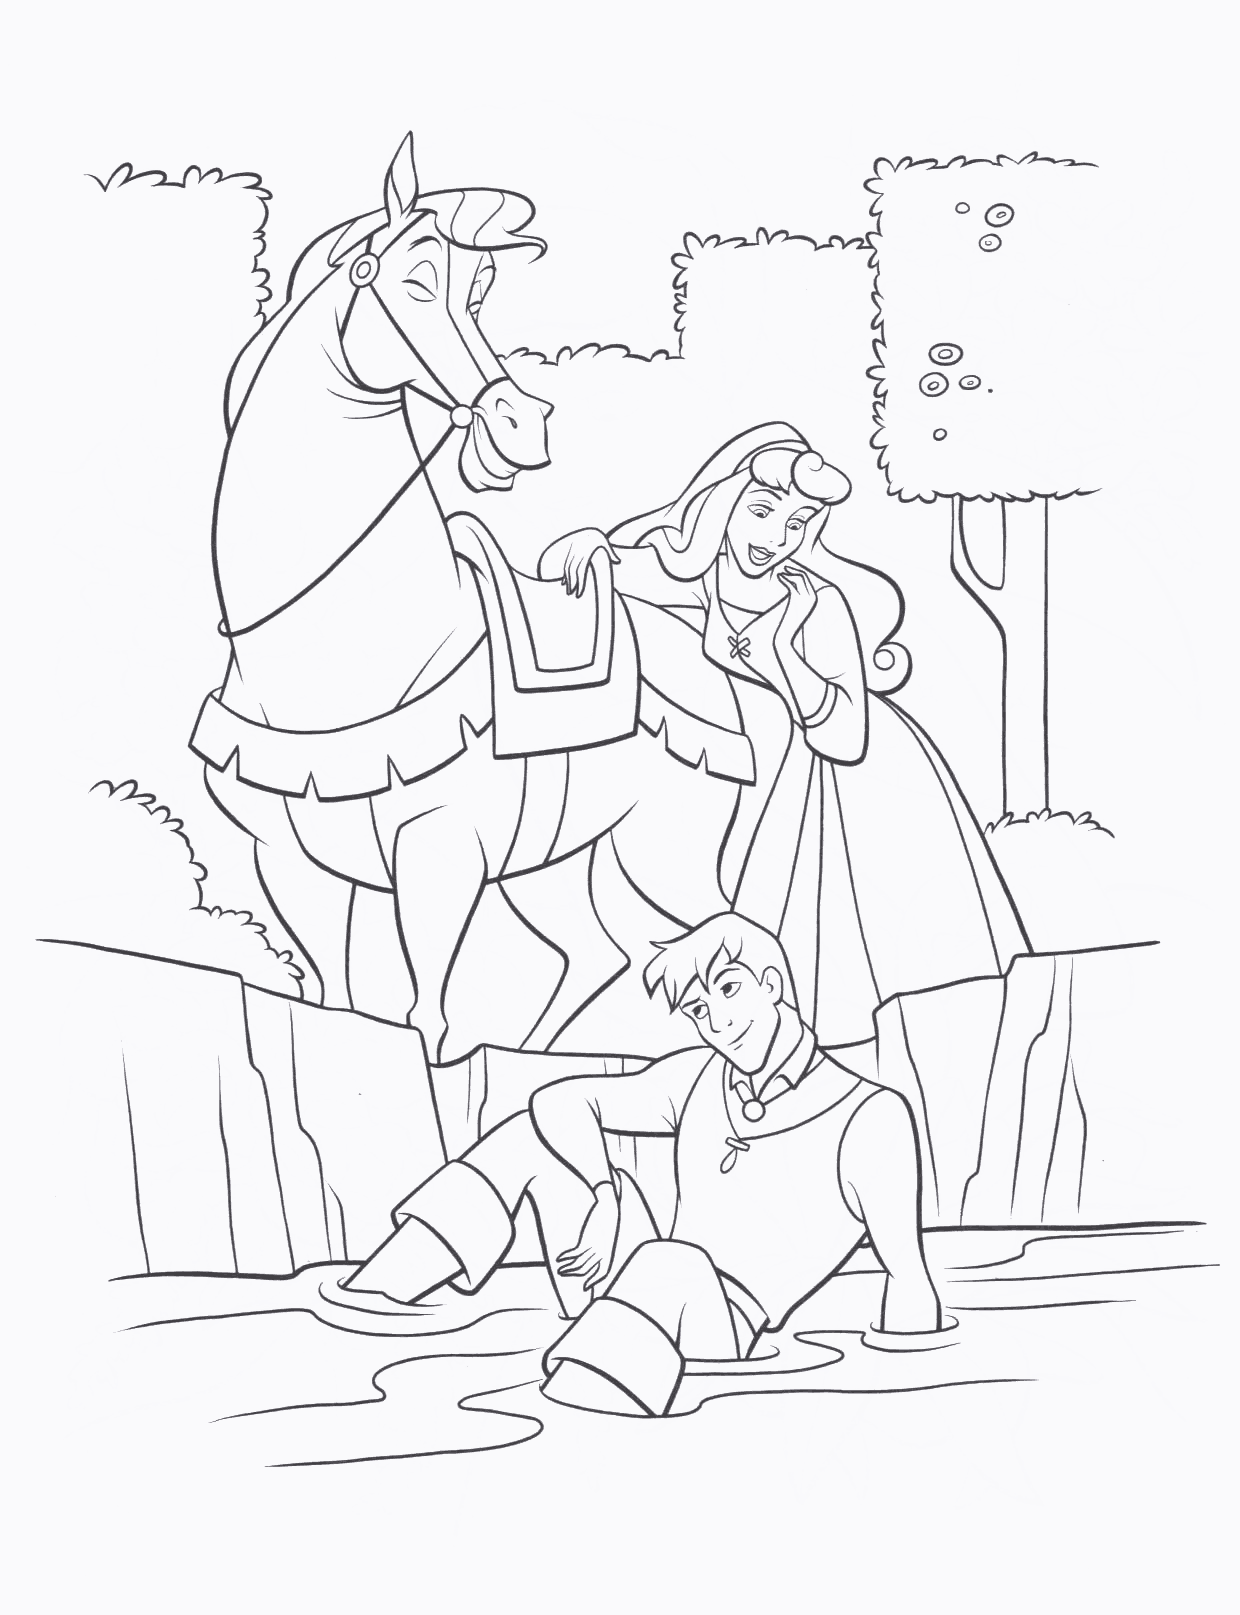 Sleeping Beauty Coloring Pages Cartoons Free Sleeping Beauty Printable 2020 5595 Coloring4free